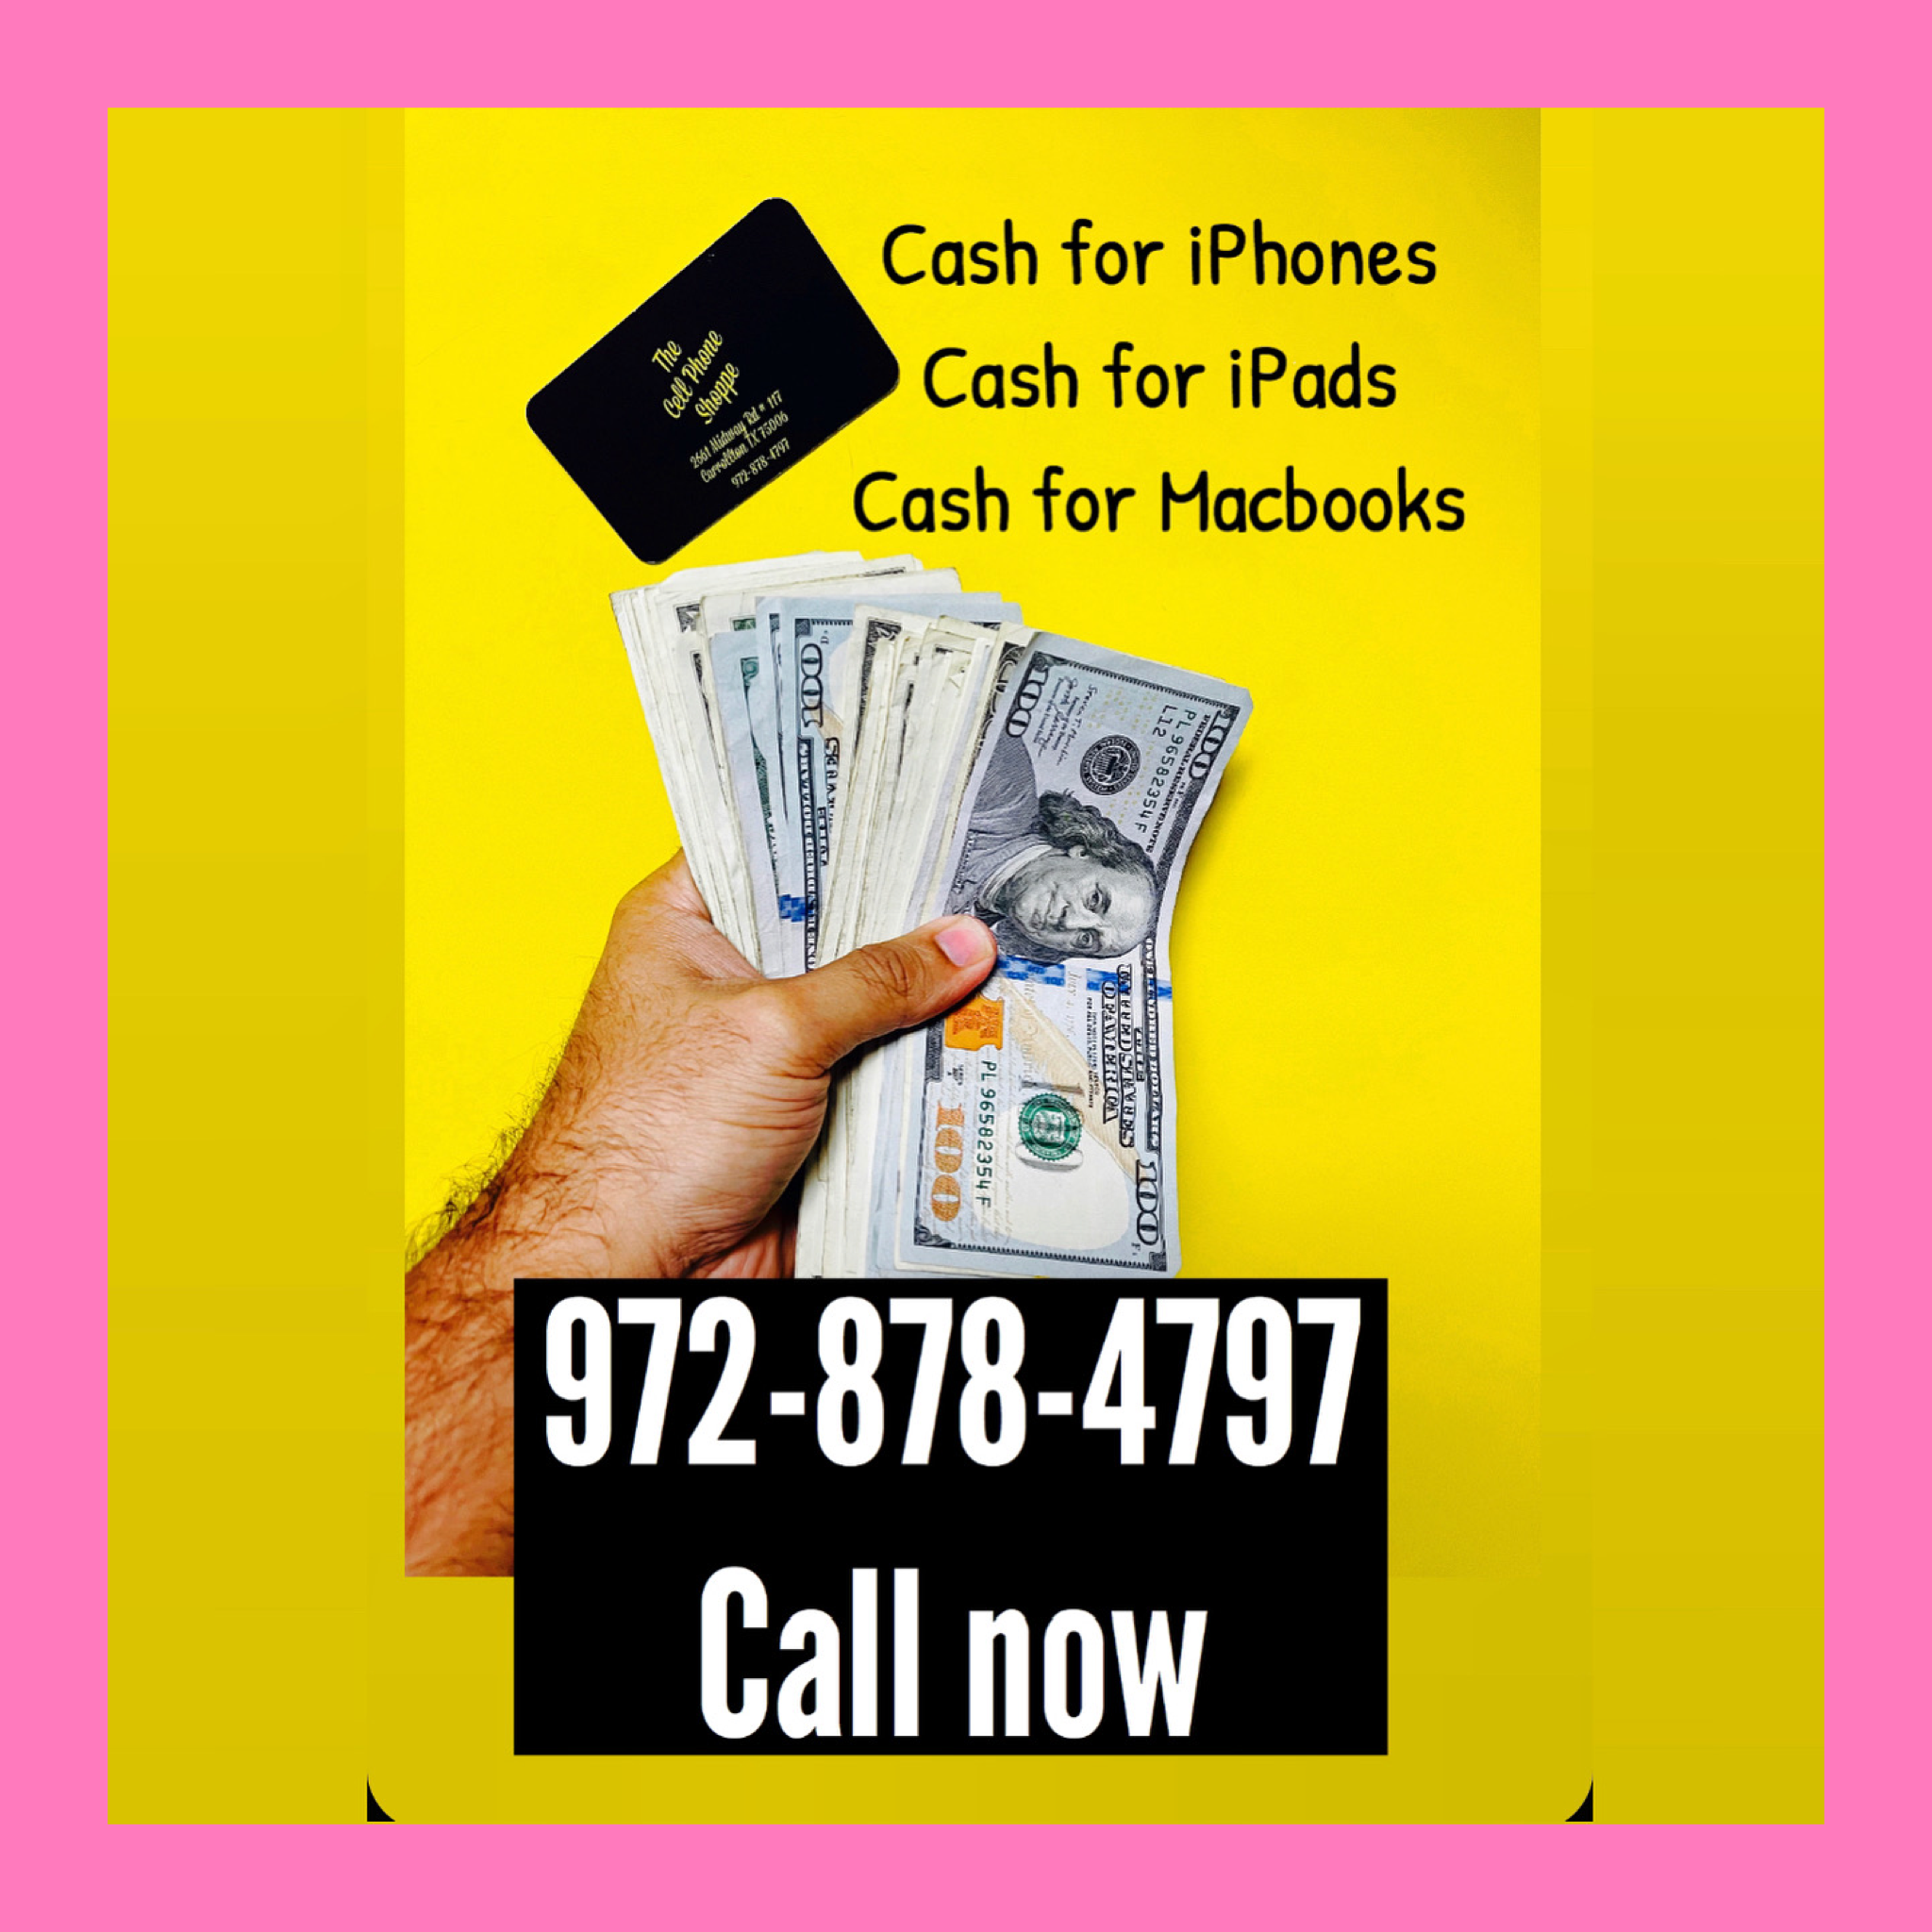 Sell your iPhone for Cash Today - Dallas TX